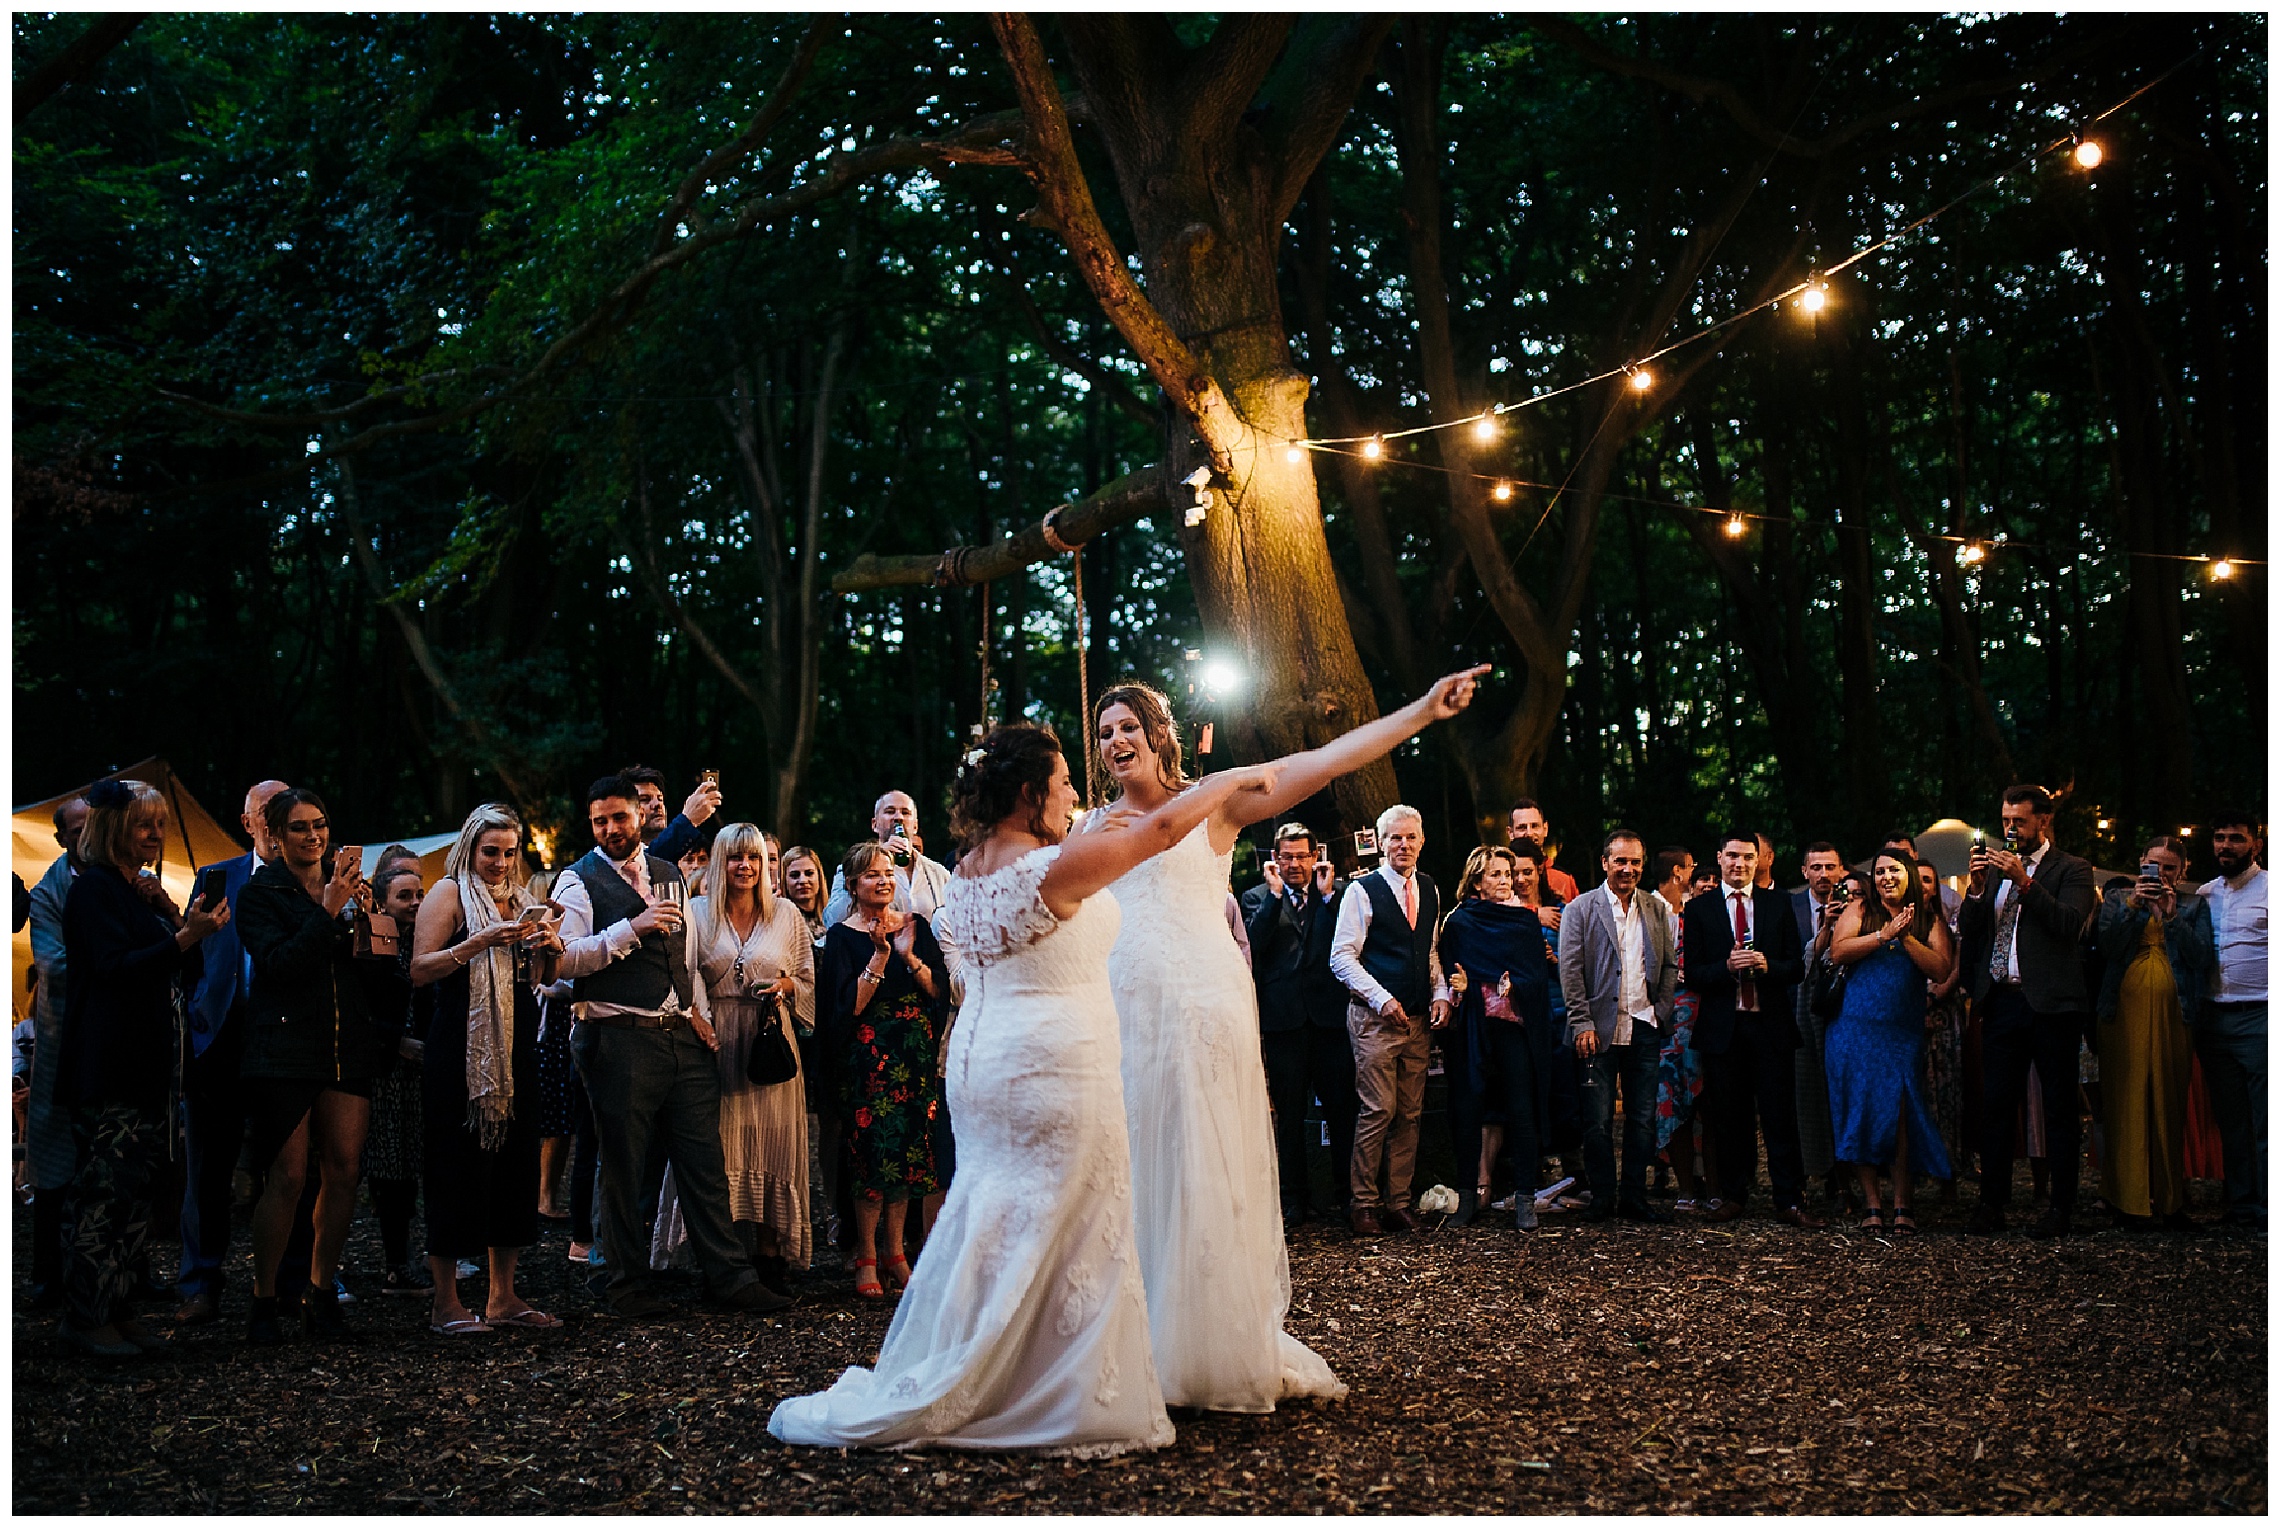 brides dance and sing along to like an arrow at outdoor woodland wedding